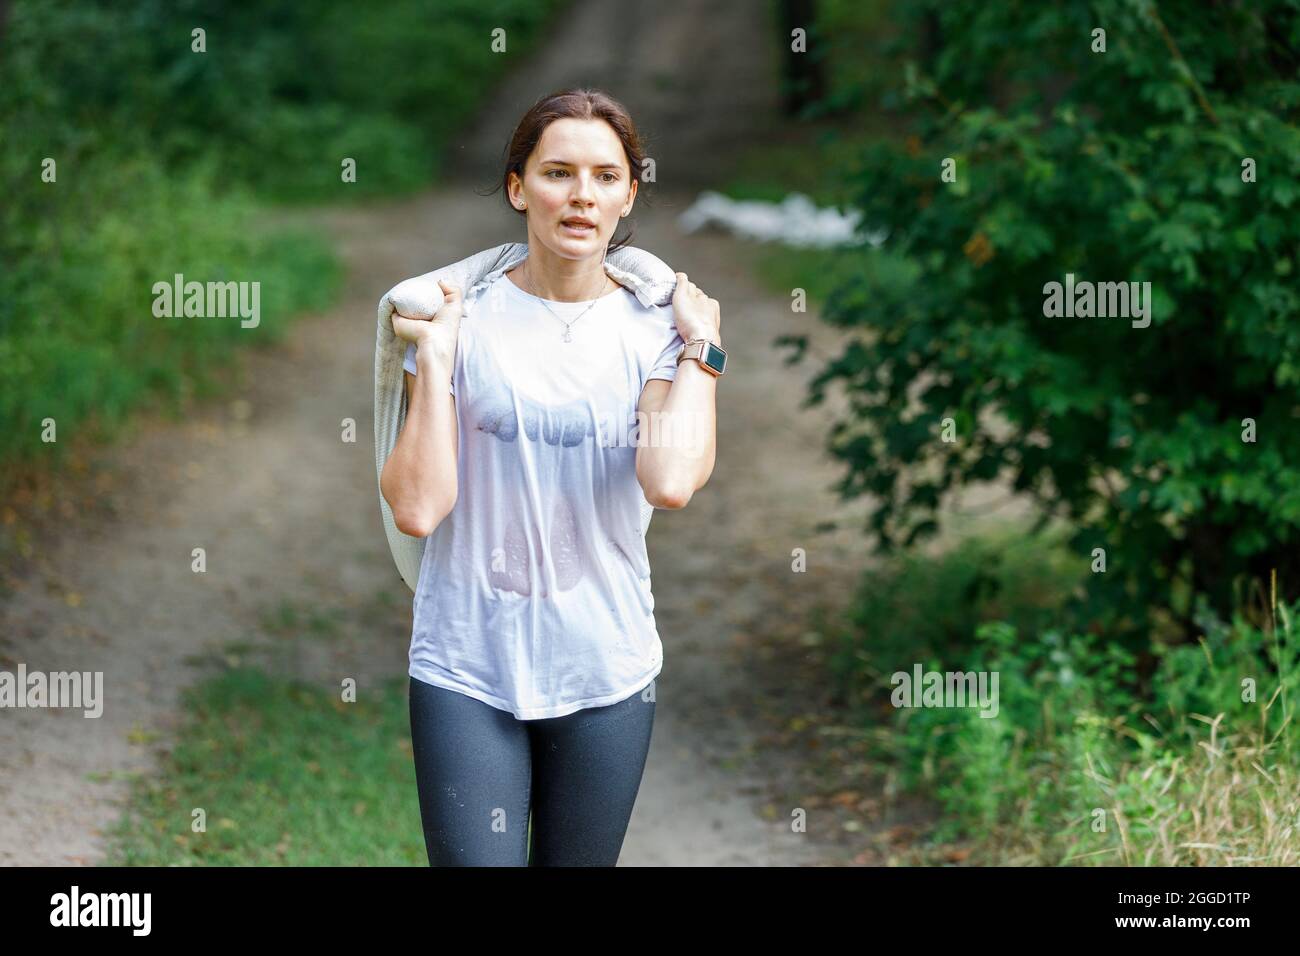 Young woman carying sand bag on her obstacle race course Stock Photo